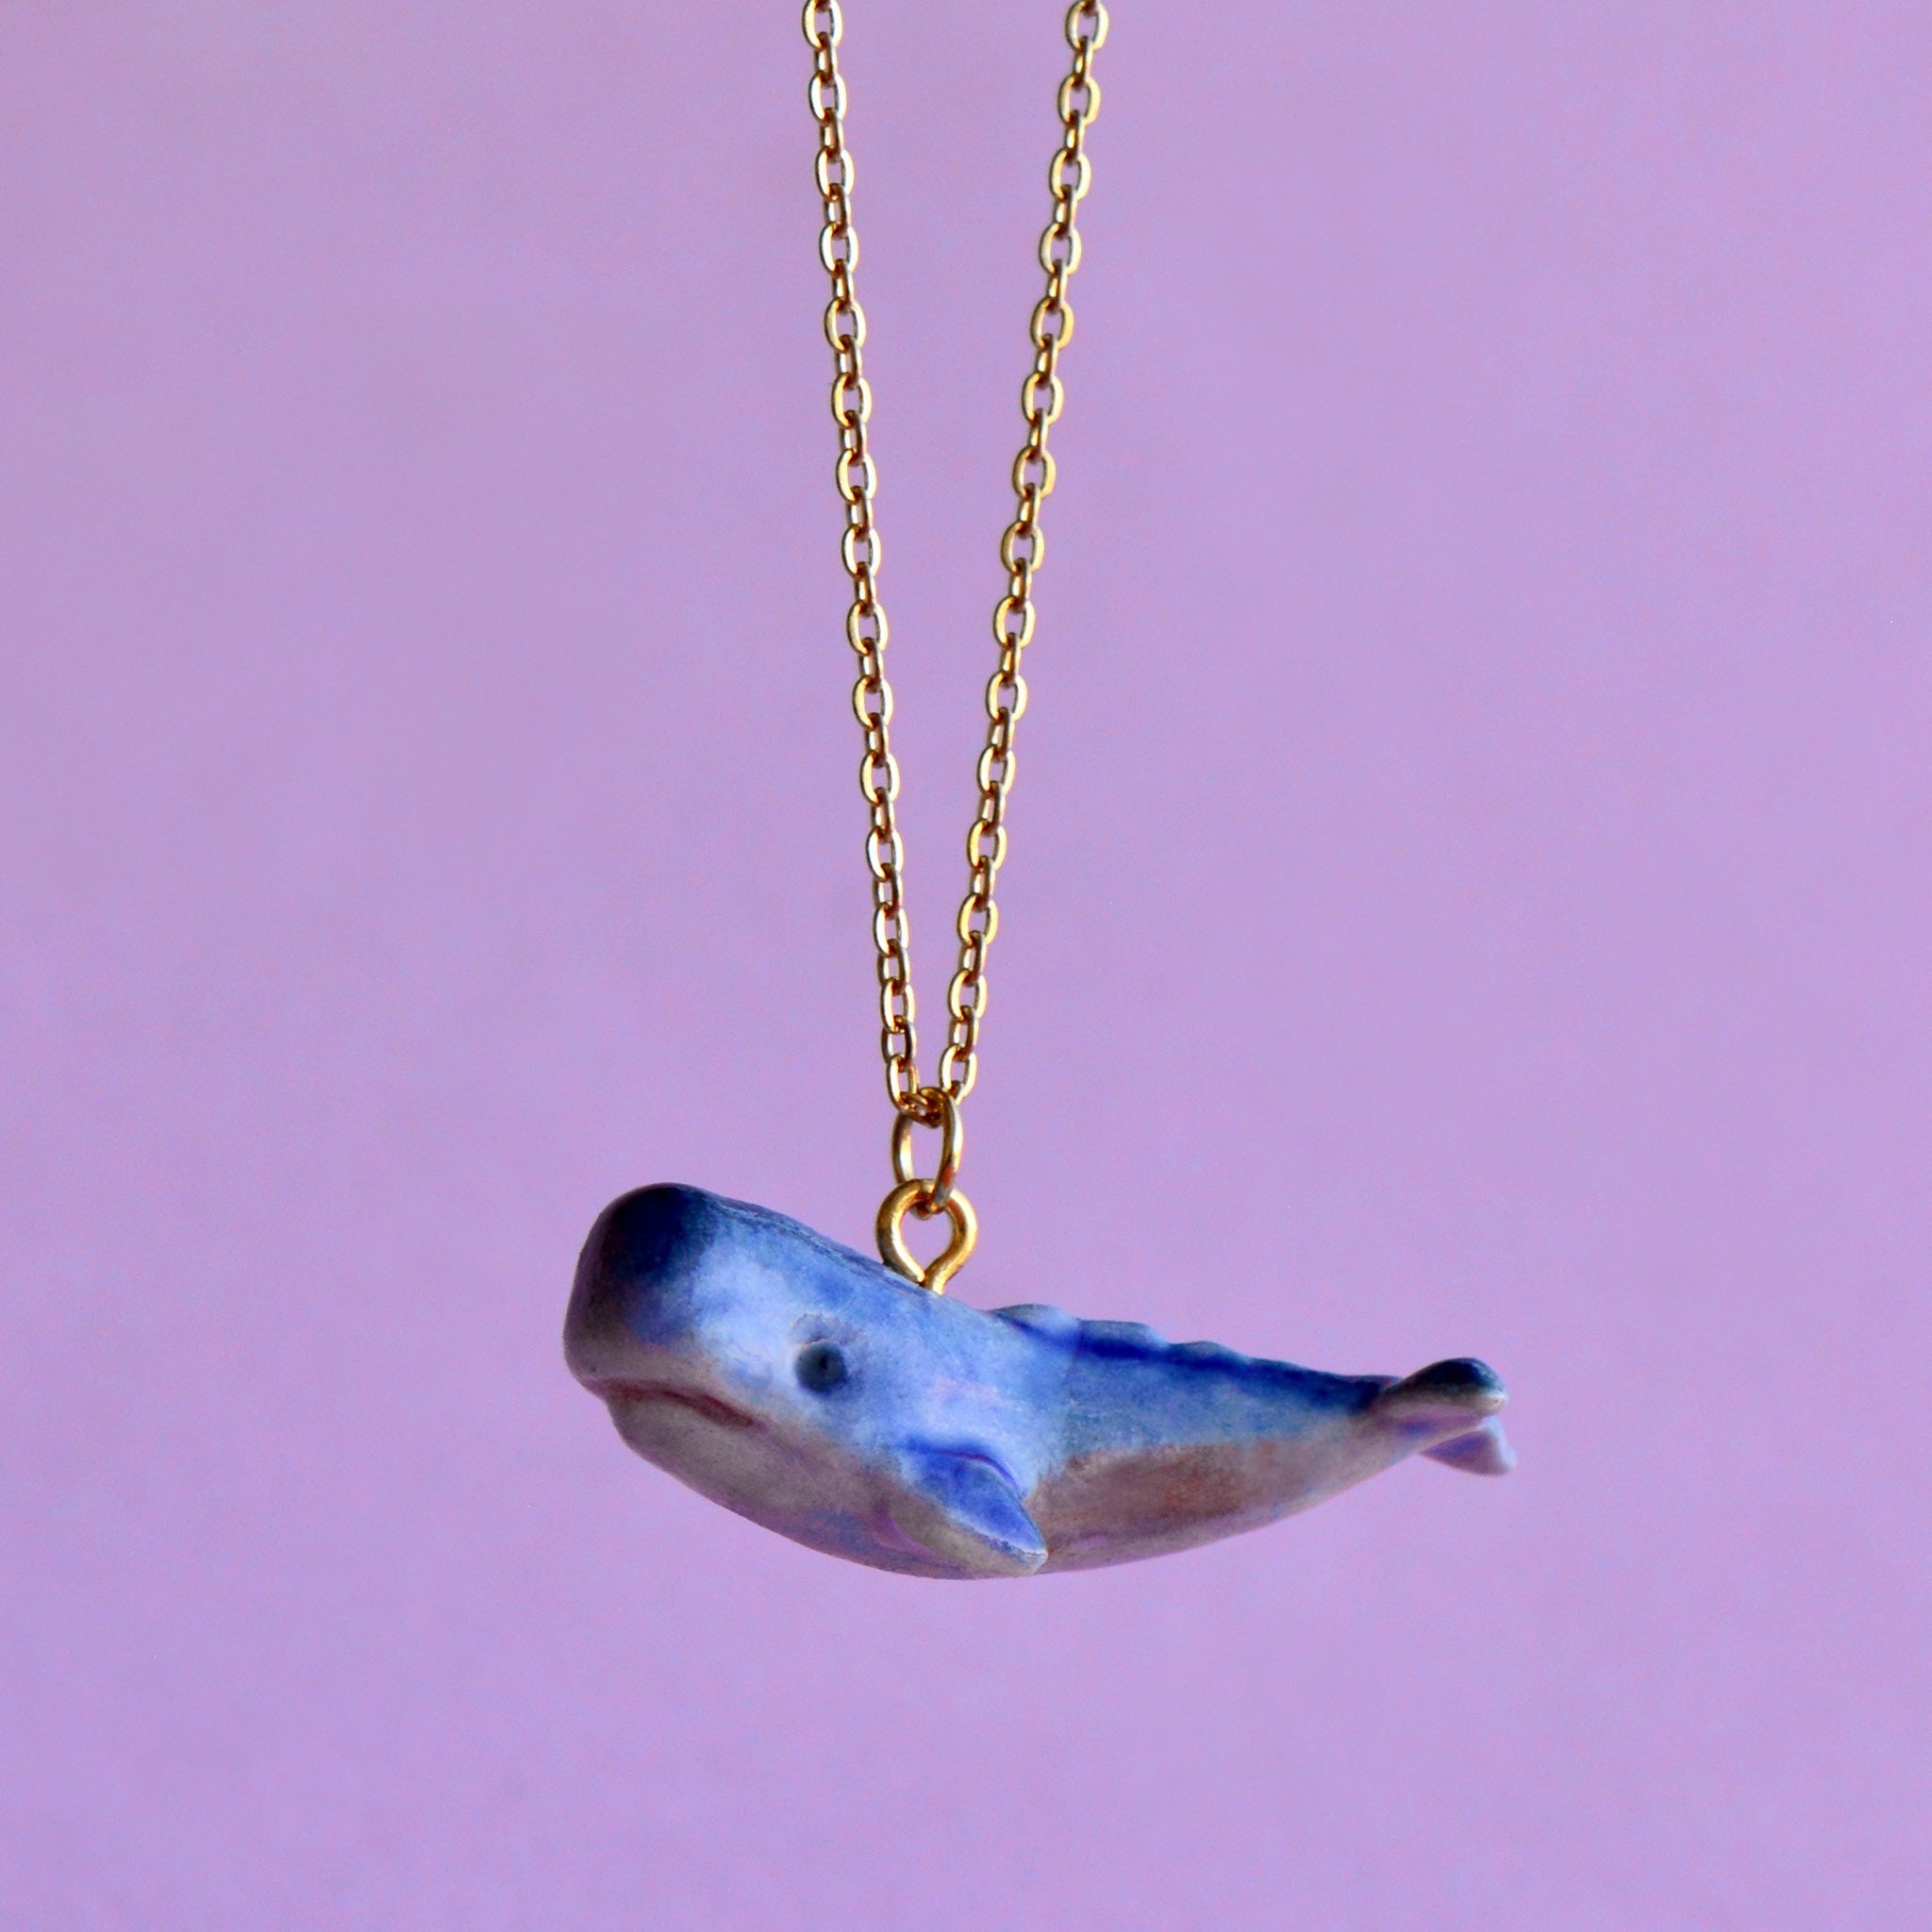 Whale Necklace | Camp Hollow Ceramic Animal Jewelry